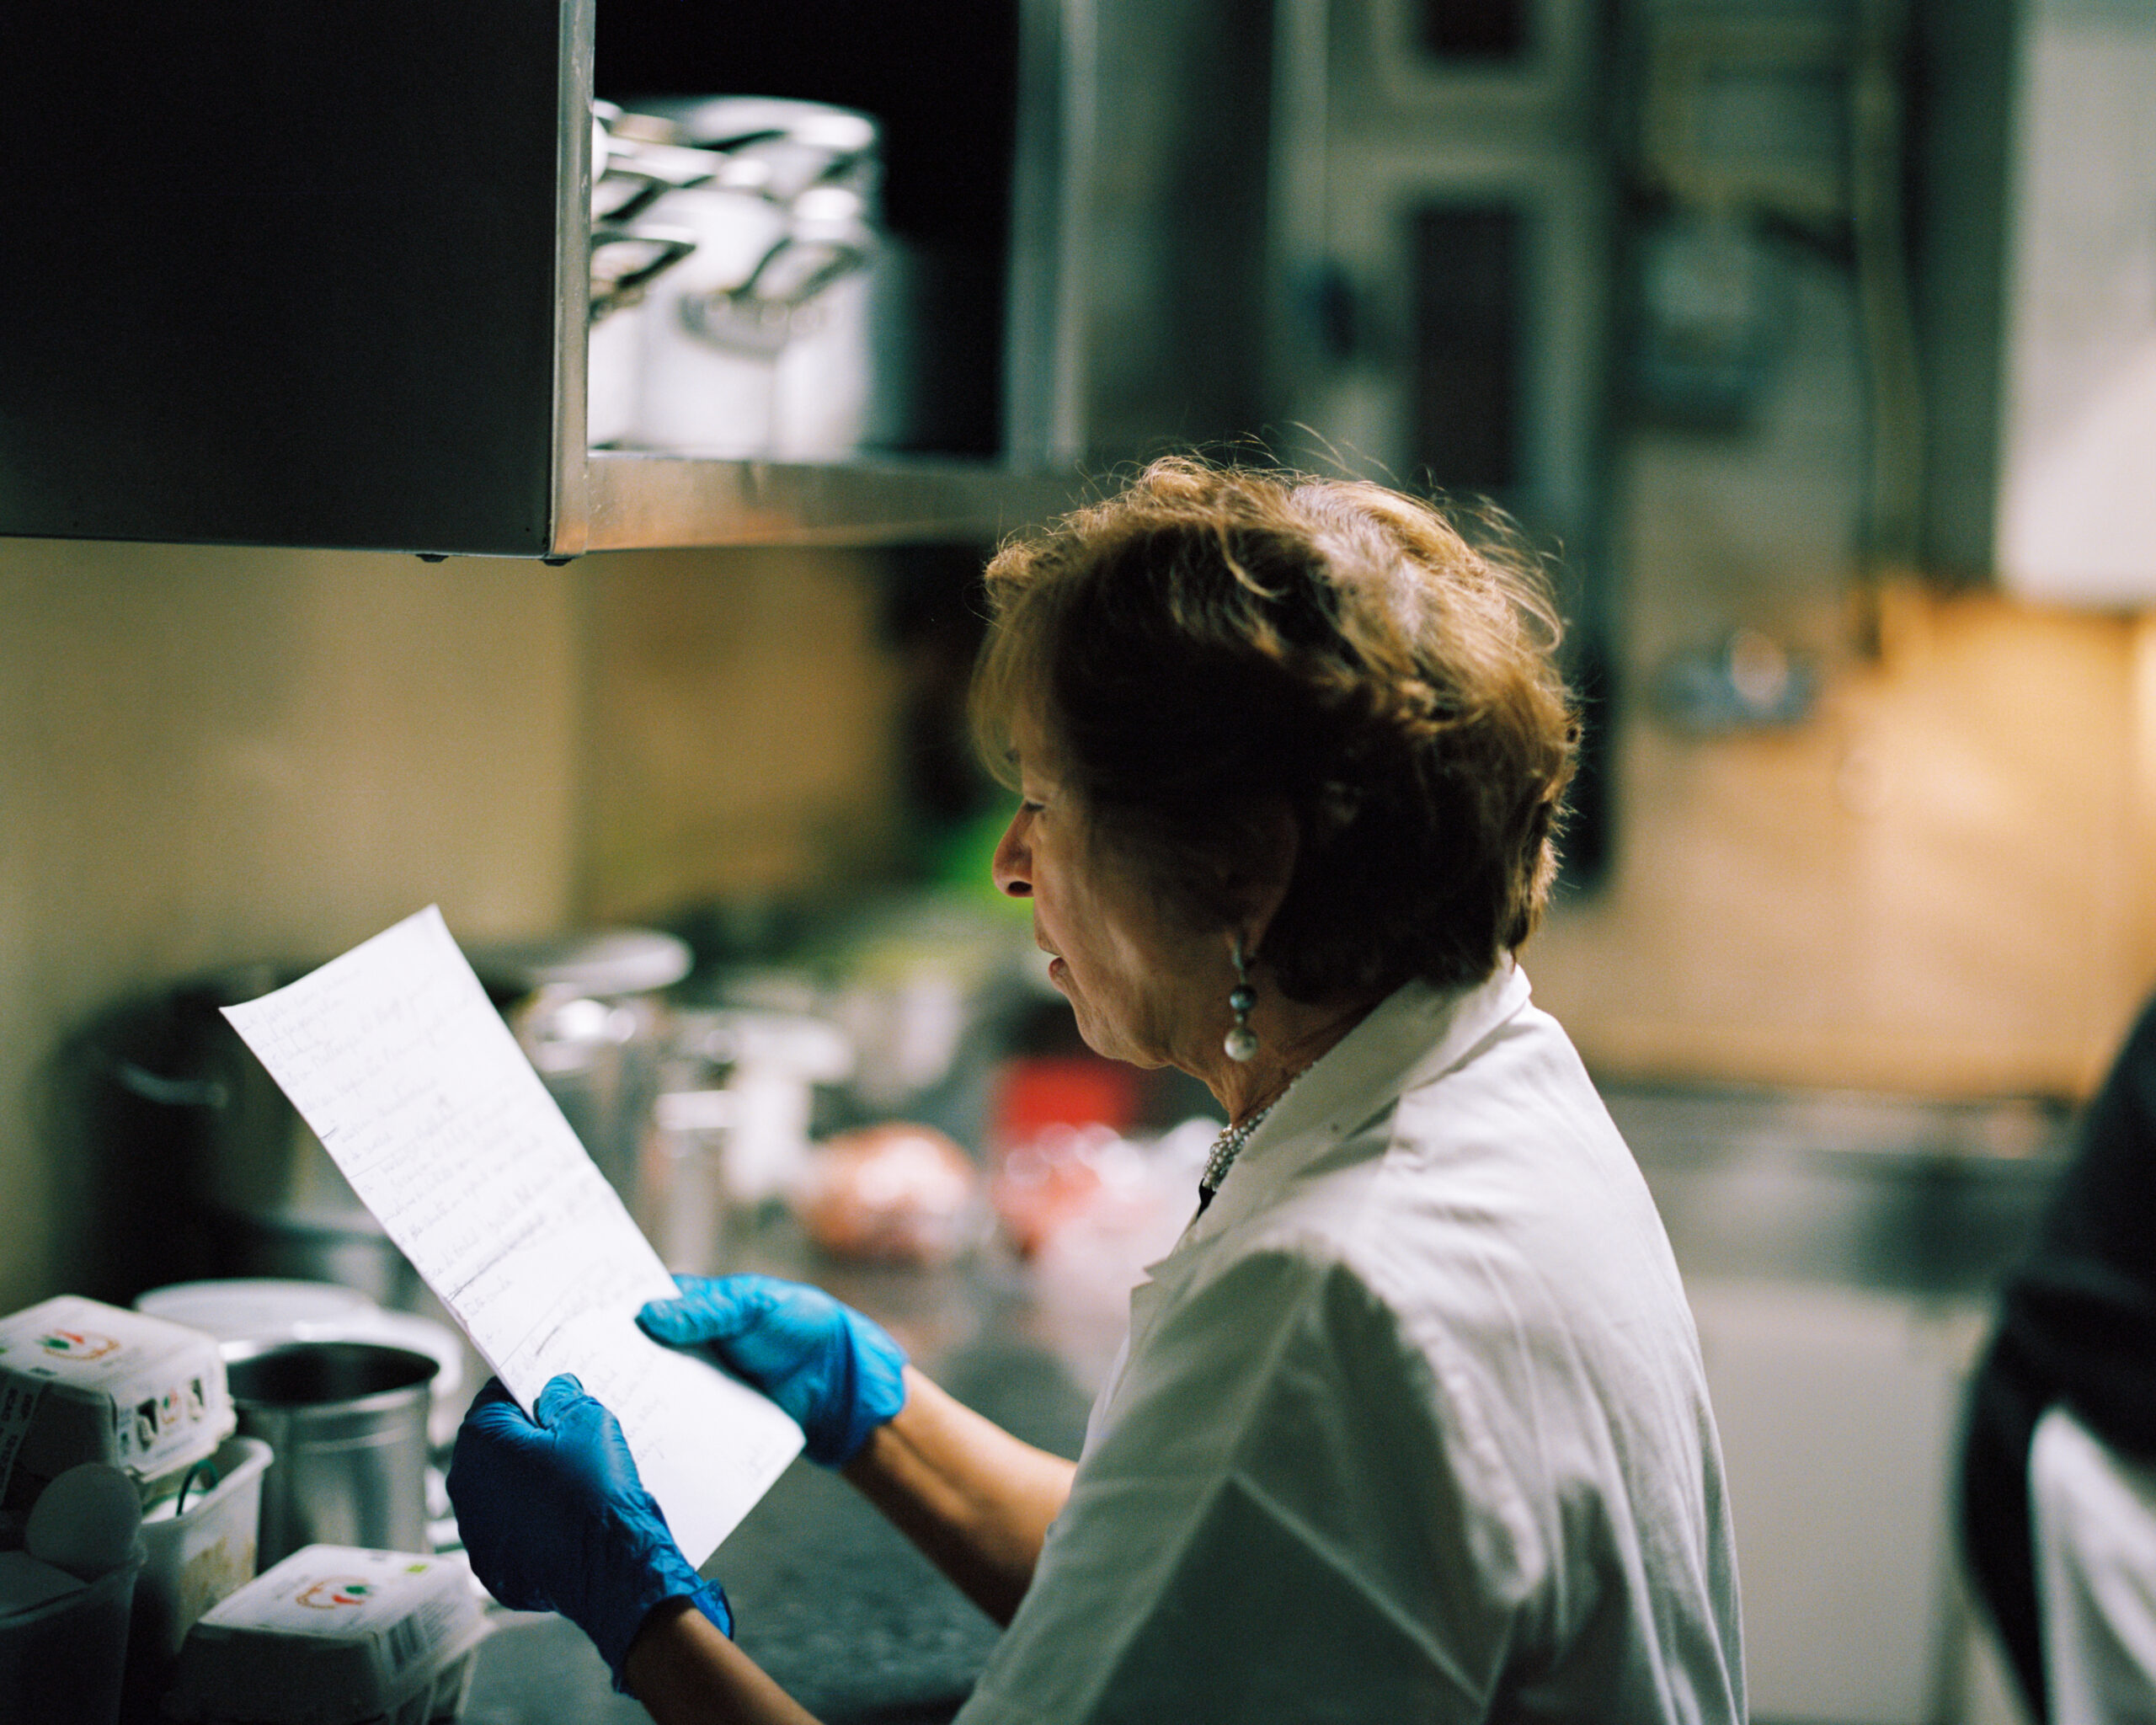 Maria Maggi holds a piece of paper that has a recipe written on it. She is reading the recipe while standing in the kitchen of La Latteria in Milano.